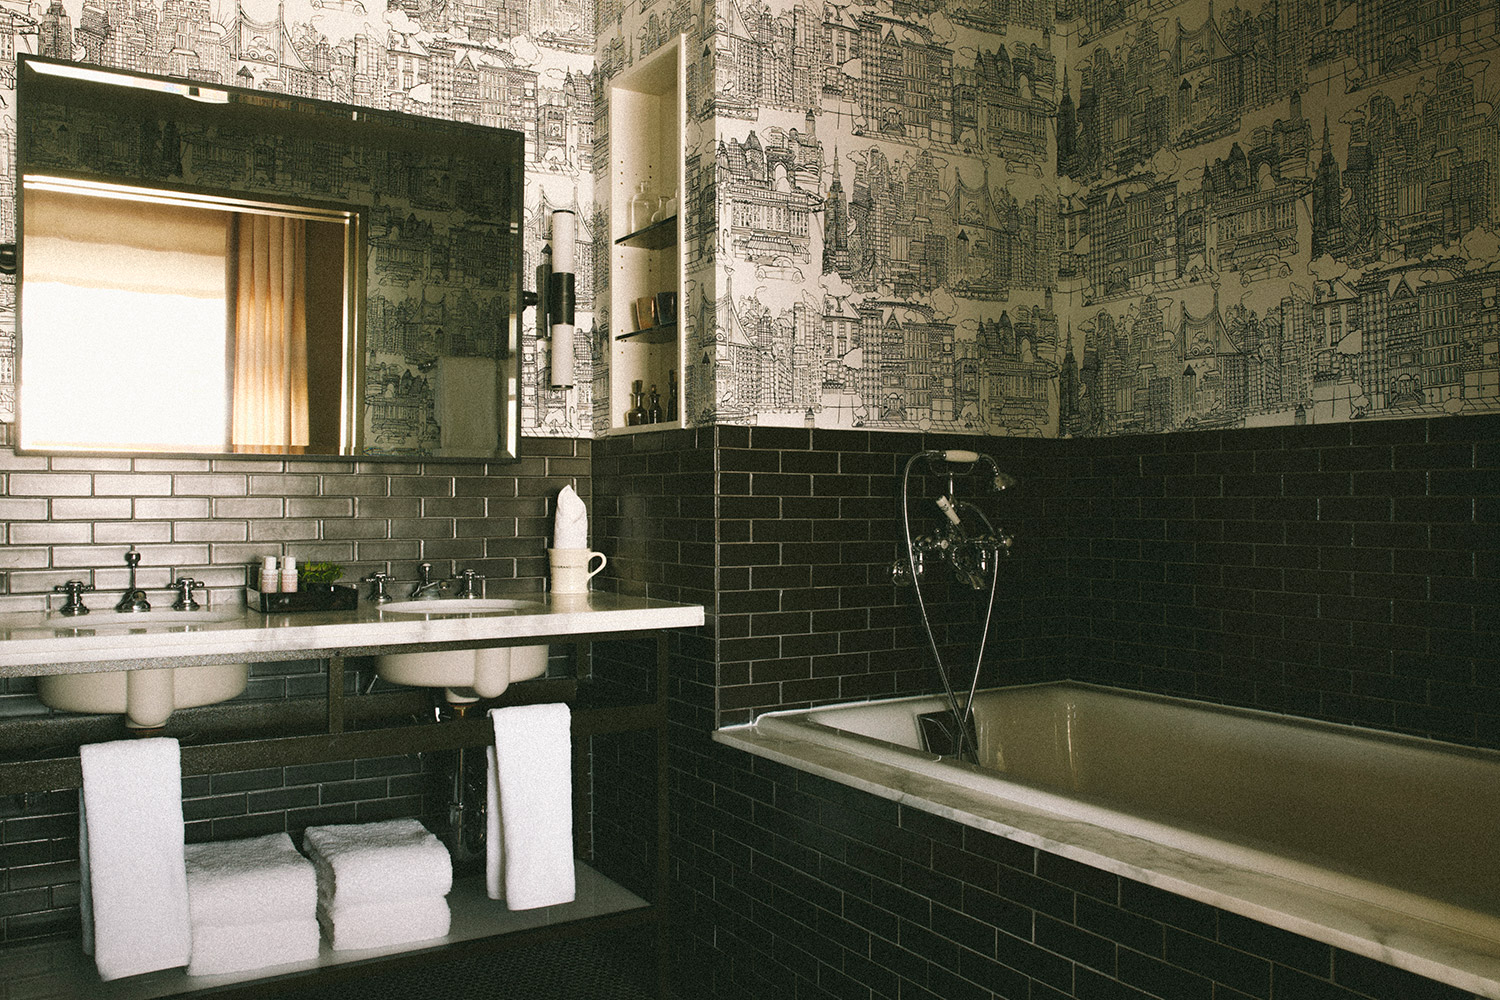 one bedroom suite bathroom with black subway tile and wallpaper details. There is a bathtub next to the sink